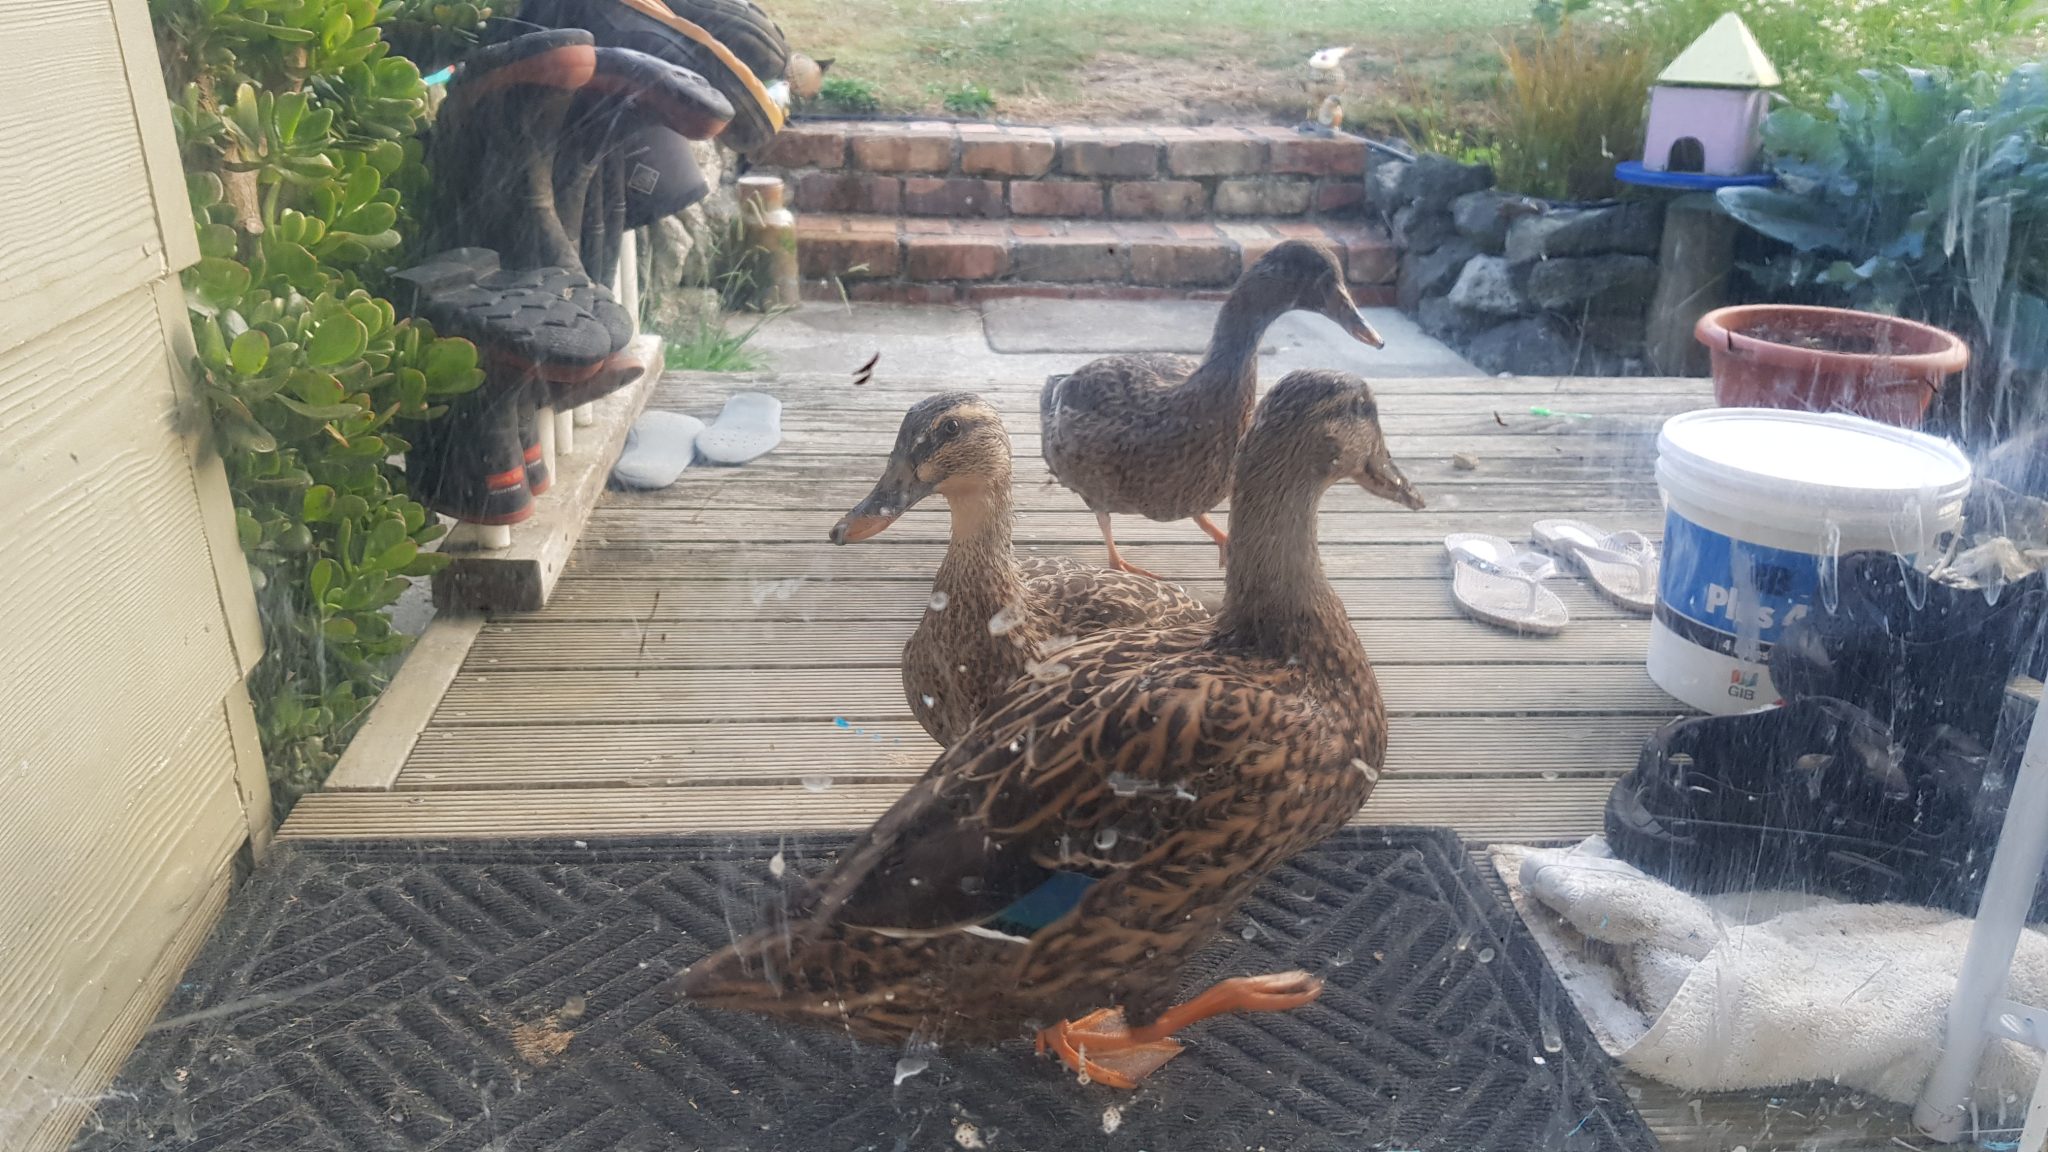 view through the front door glass onto some ducks on the footmat